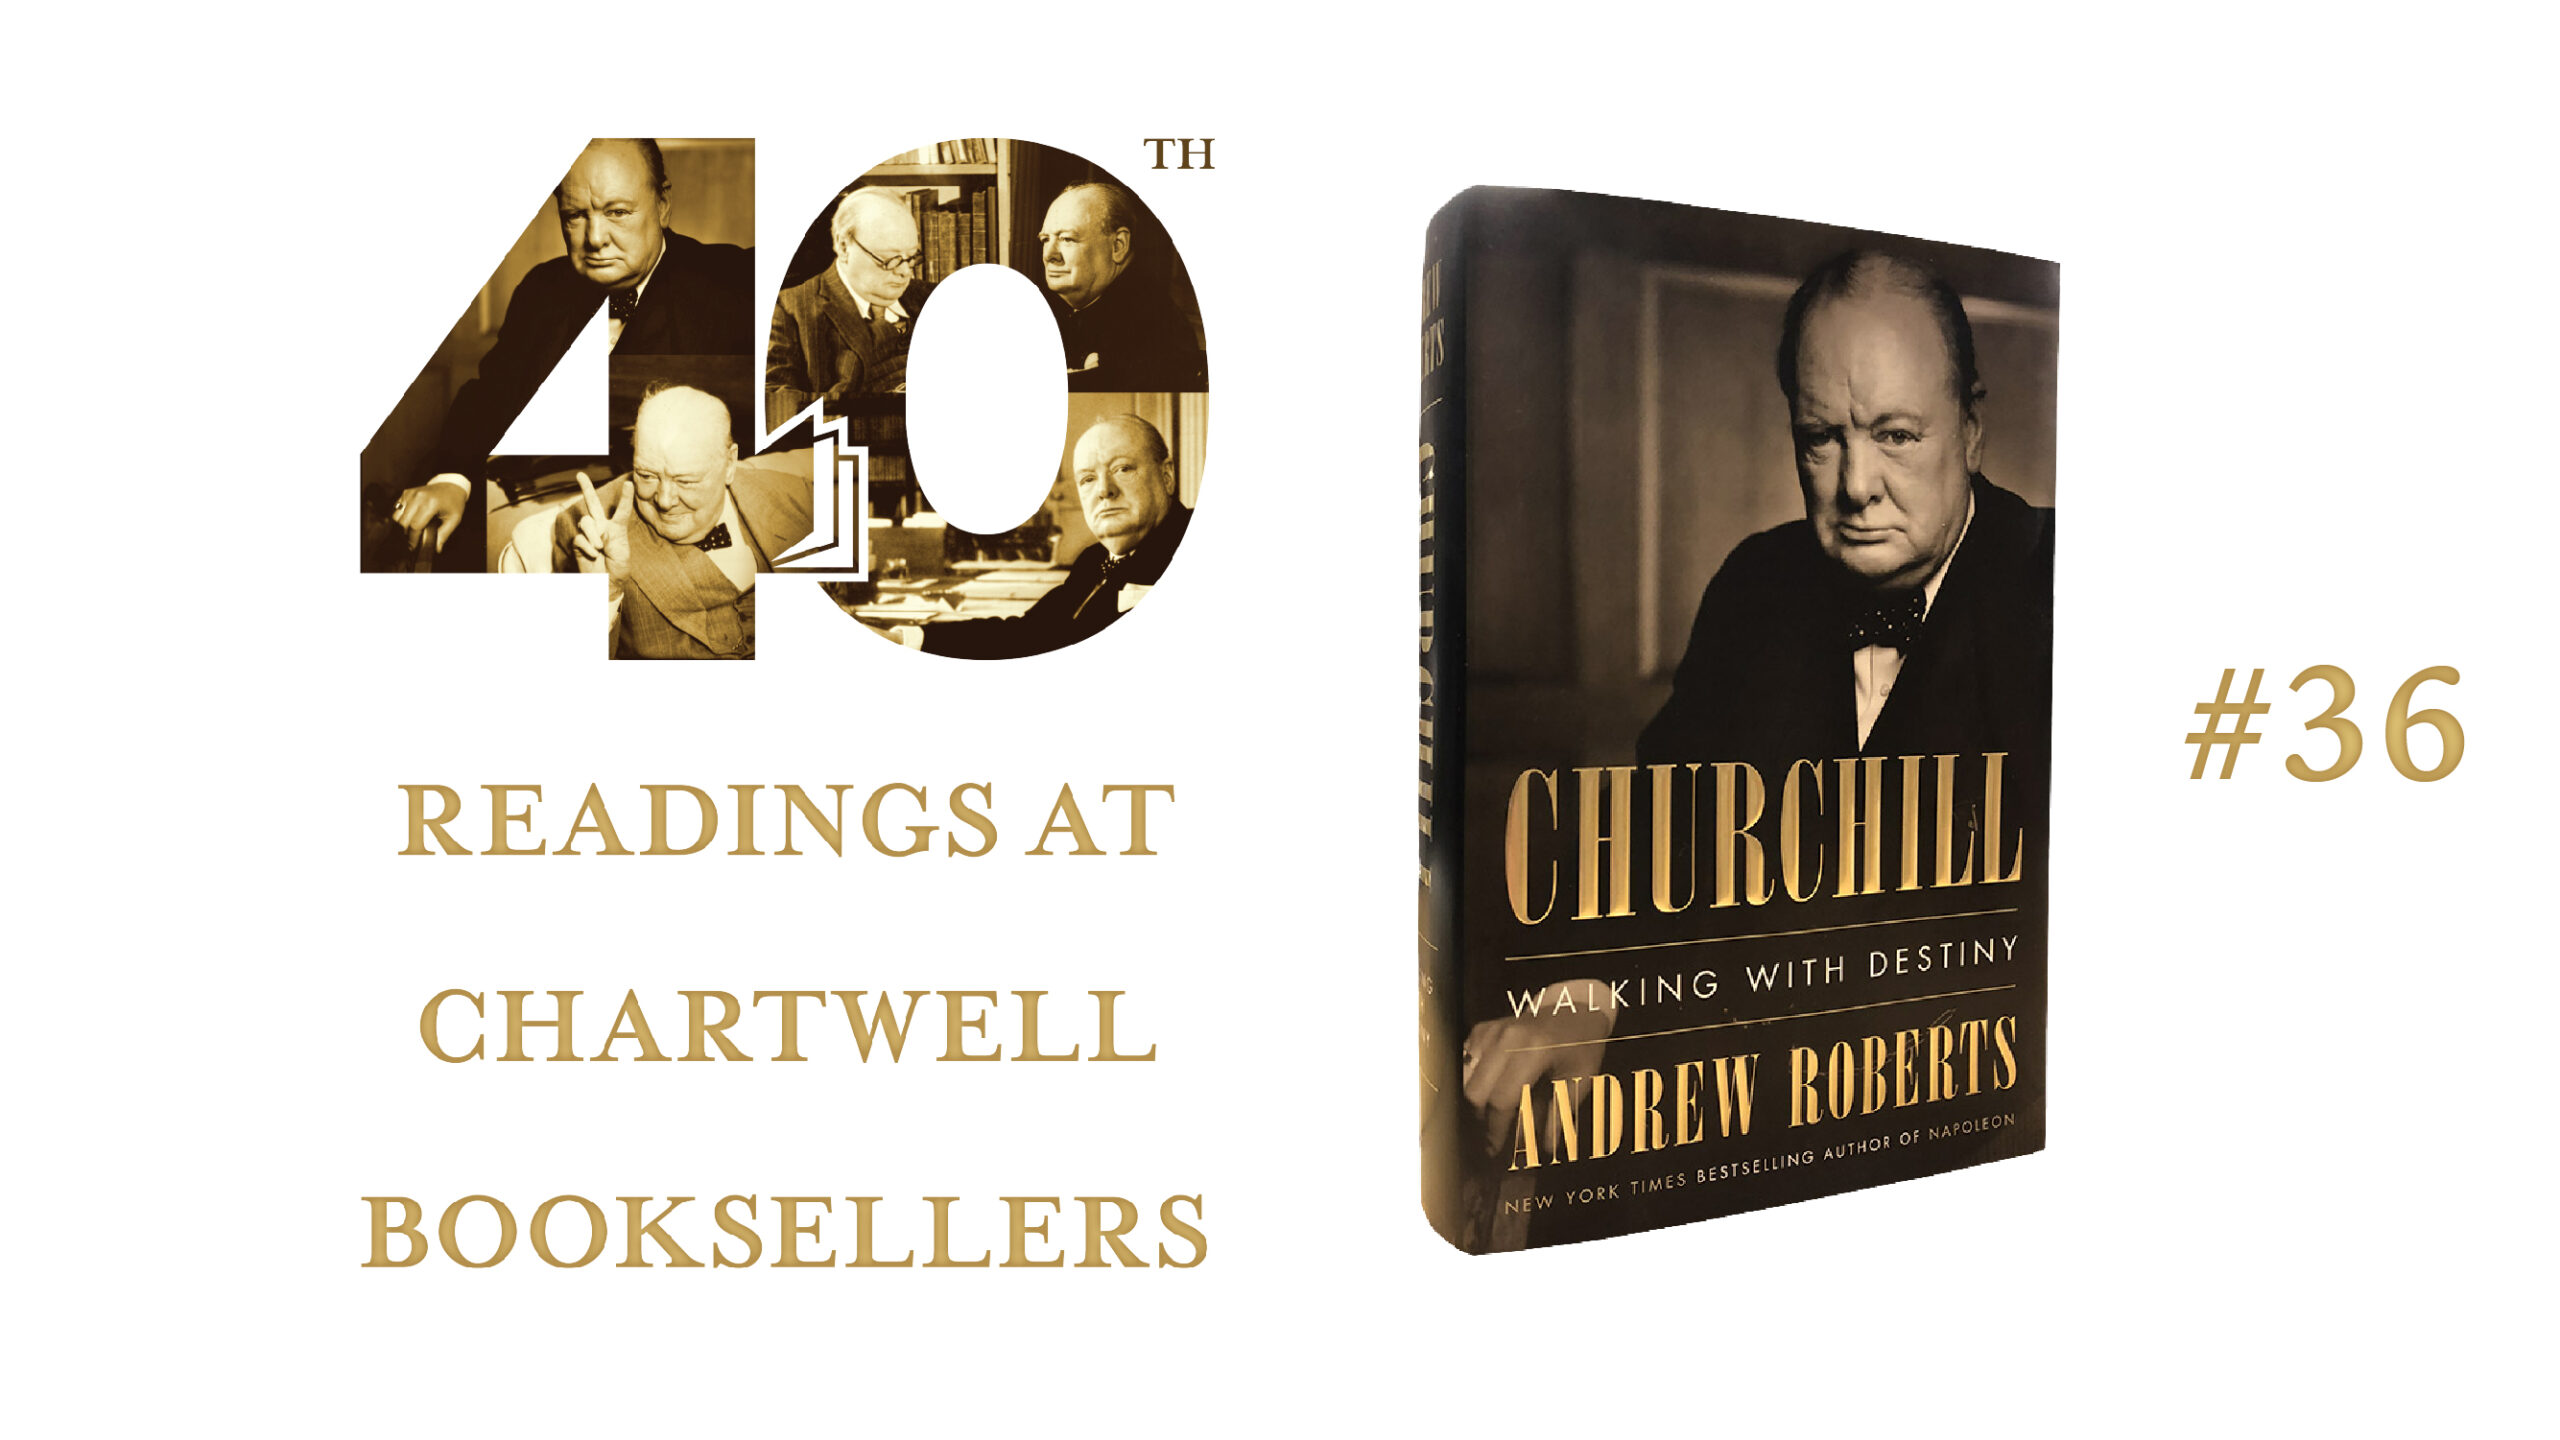 WATCH AUTHOR ANDREW ROBERTS READ “CHURCHILL: WALKING WITH DESTINY”